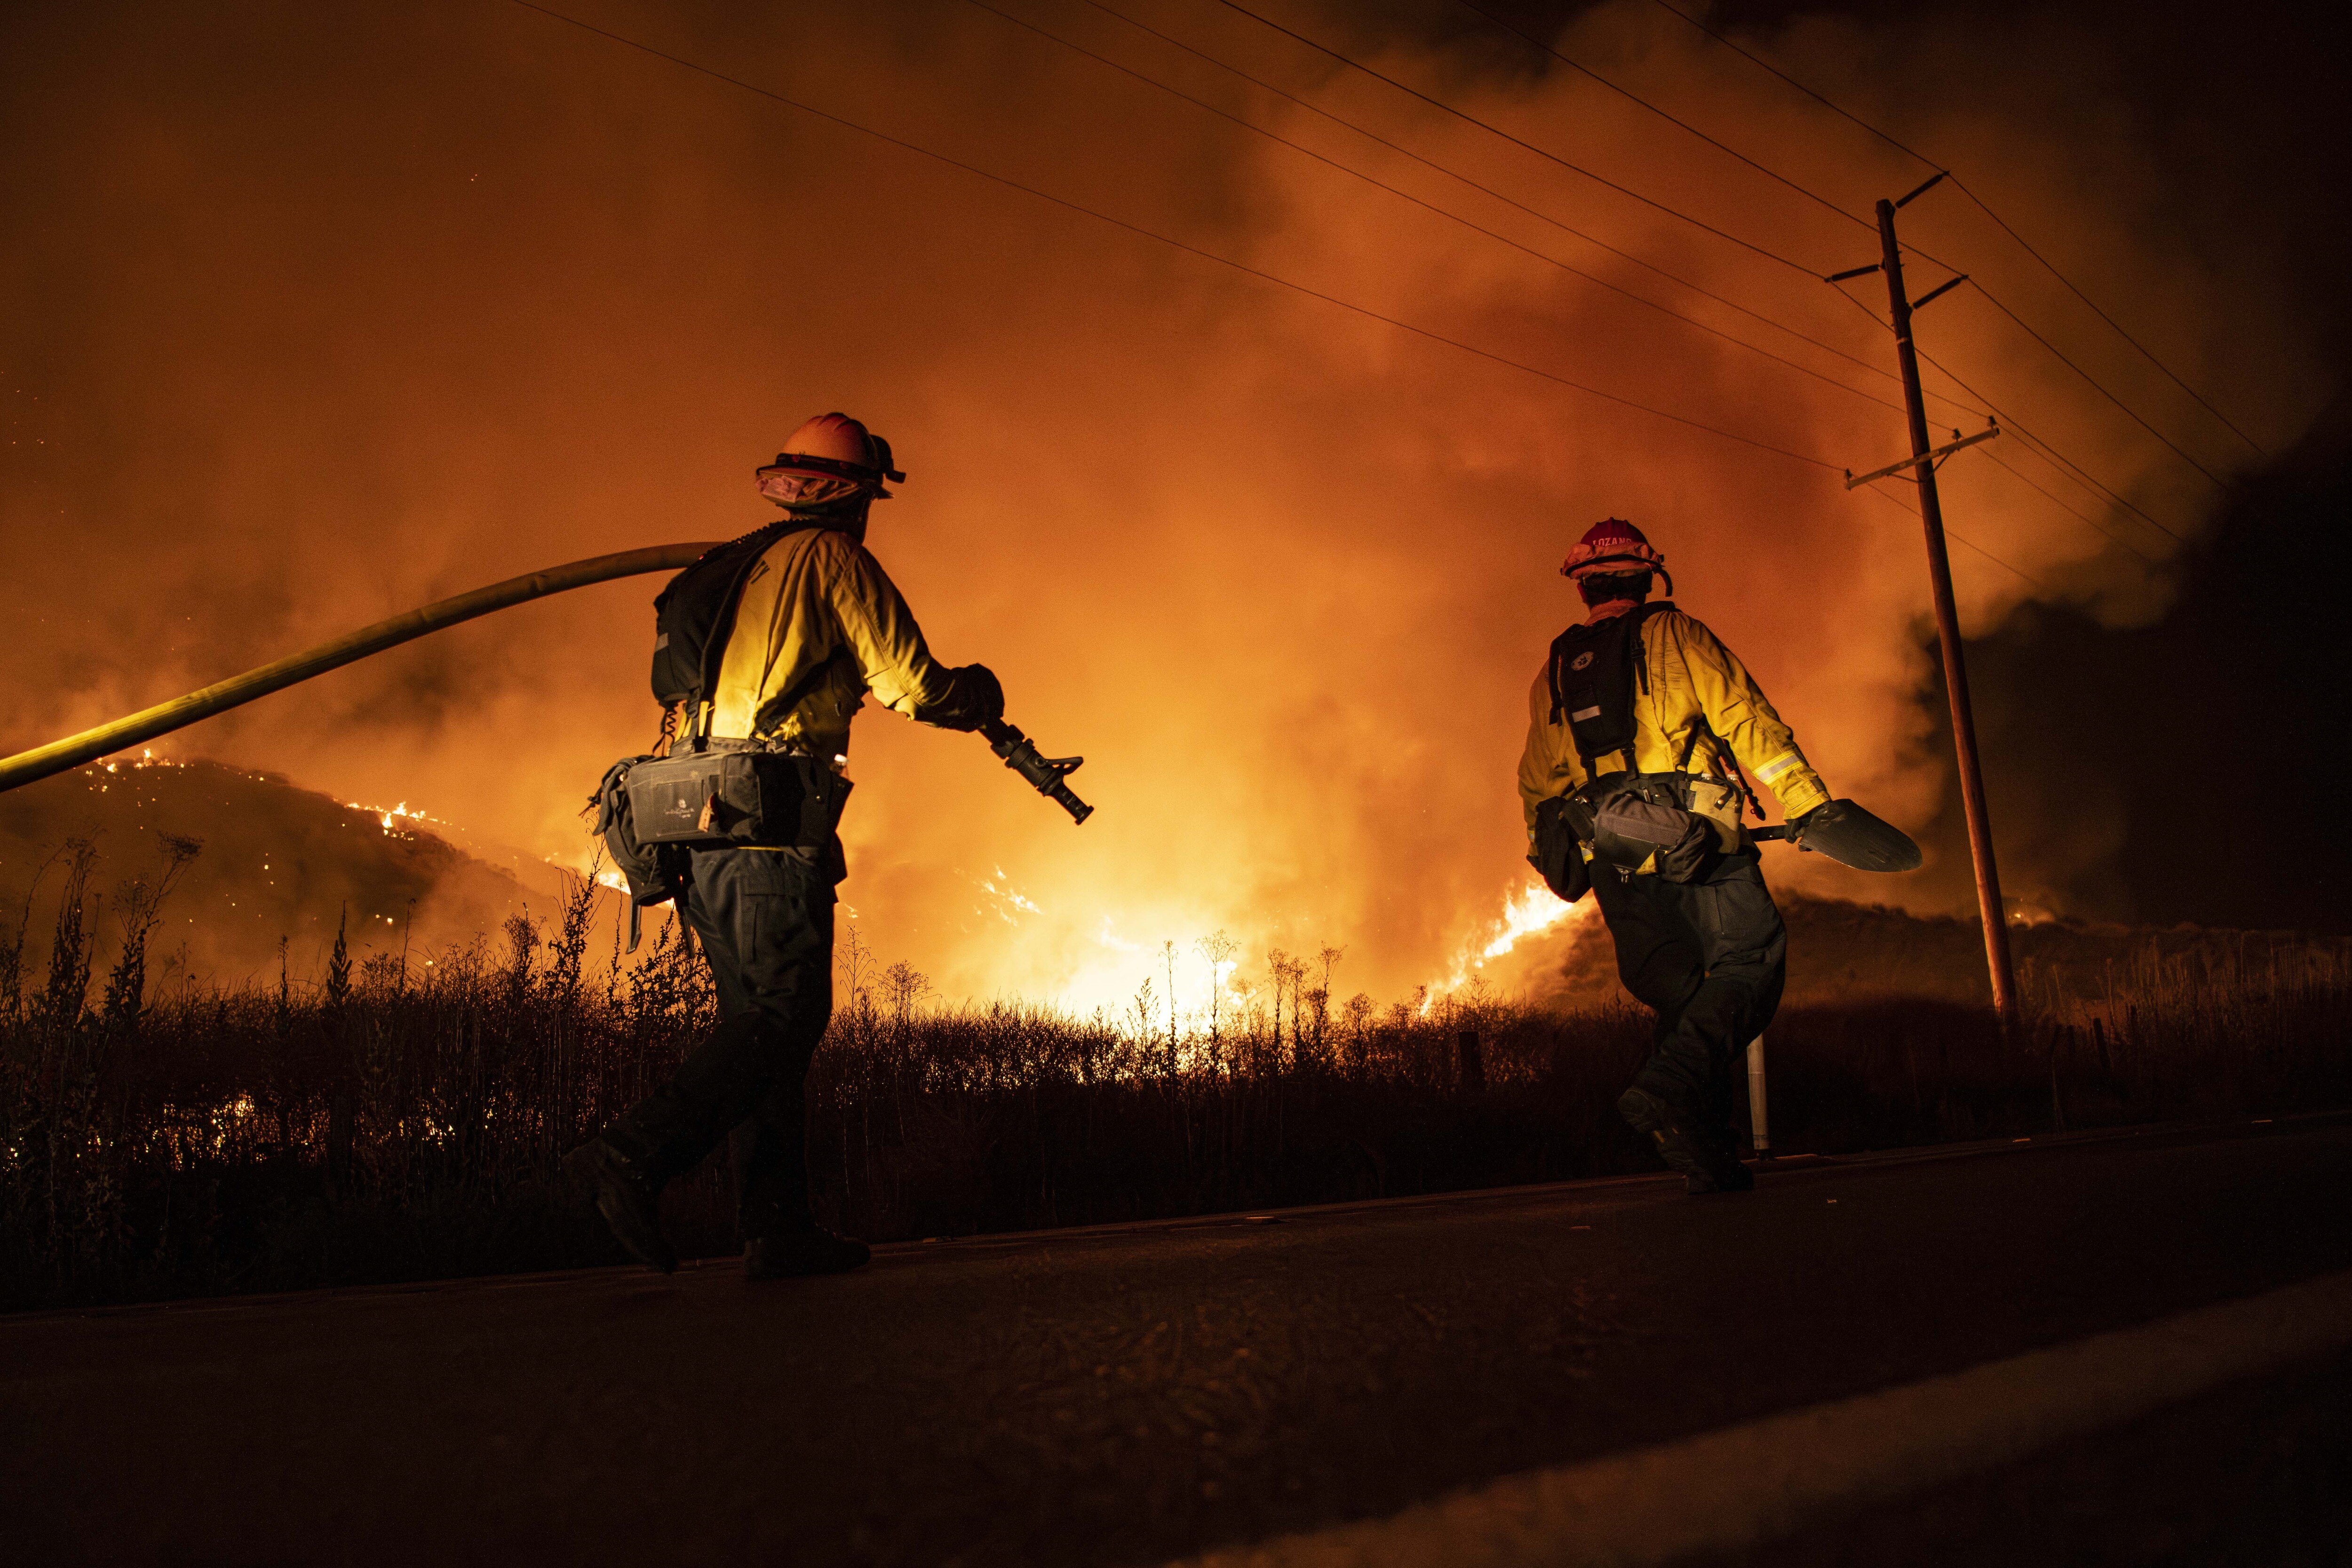 Two firefighters, one carrying a hose, are illuminated by a wildfire burning in the background.